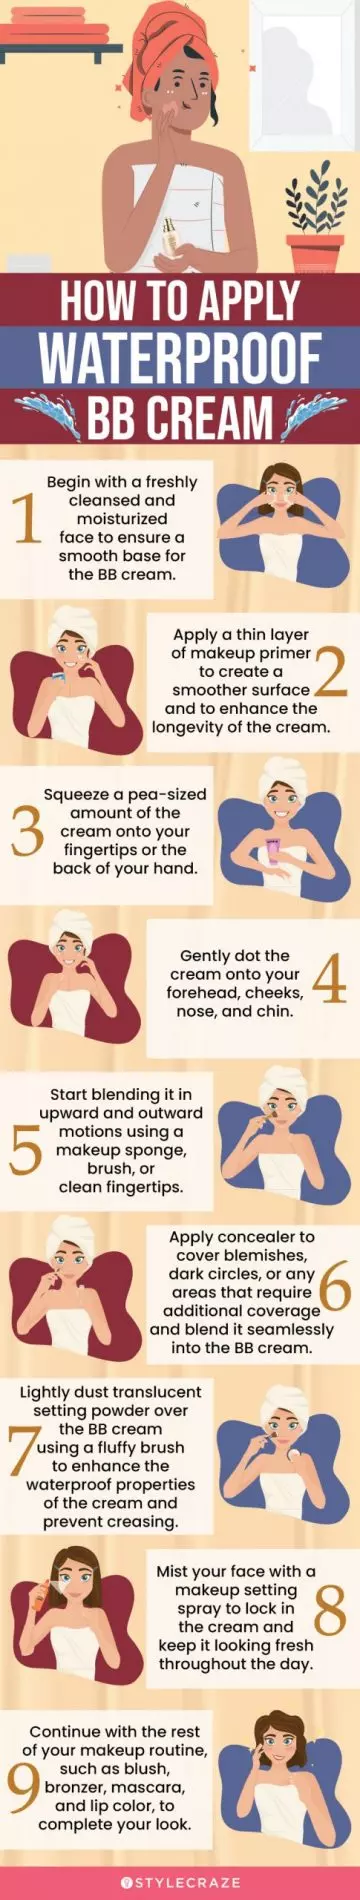 How To Apply Waterproof BB Cream (infographic)